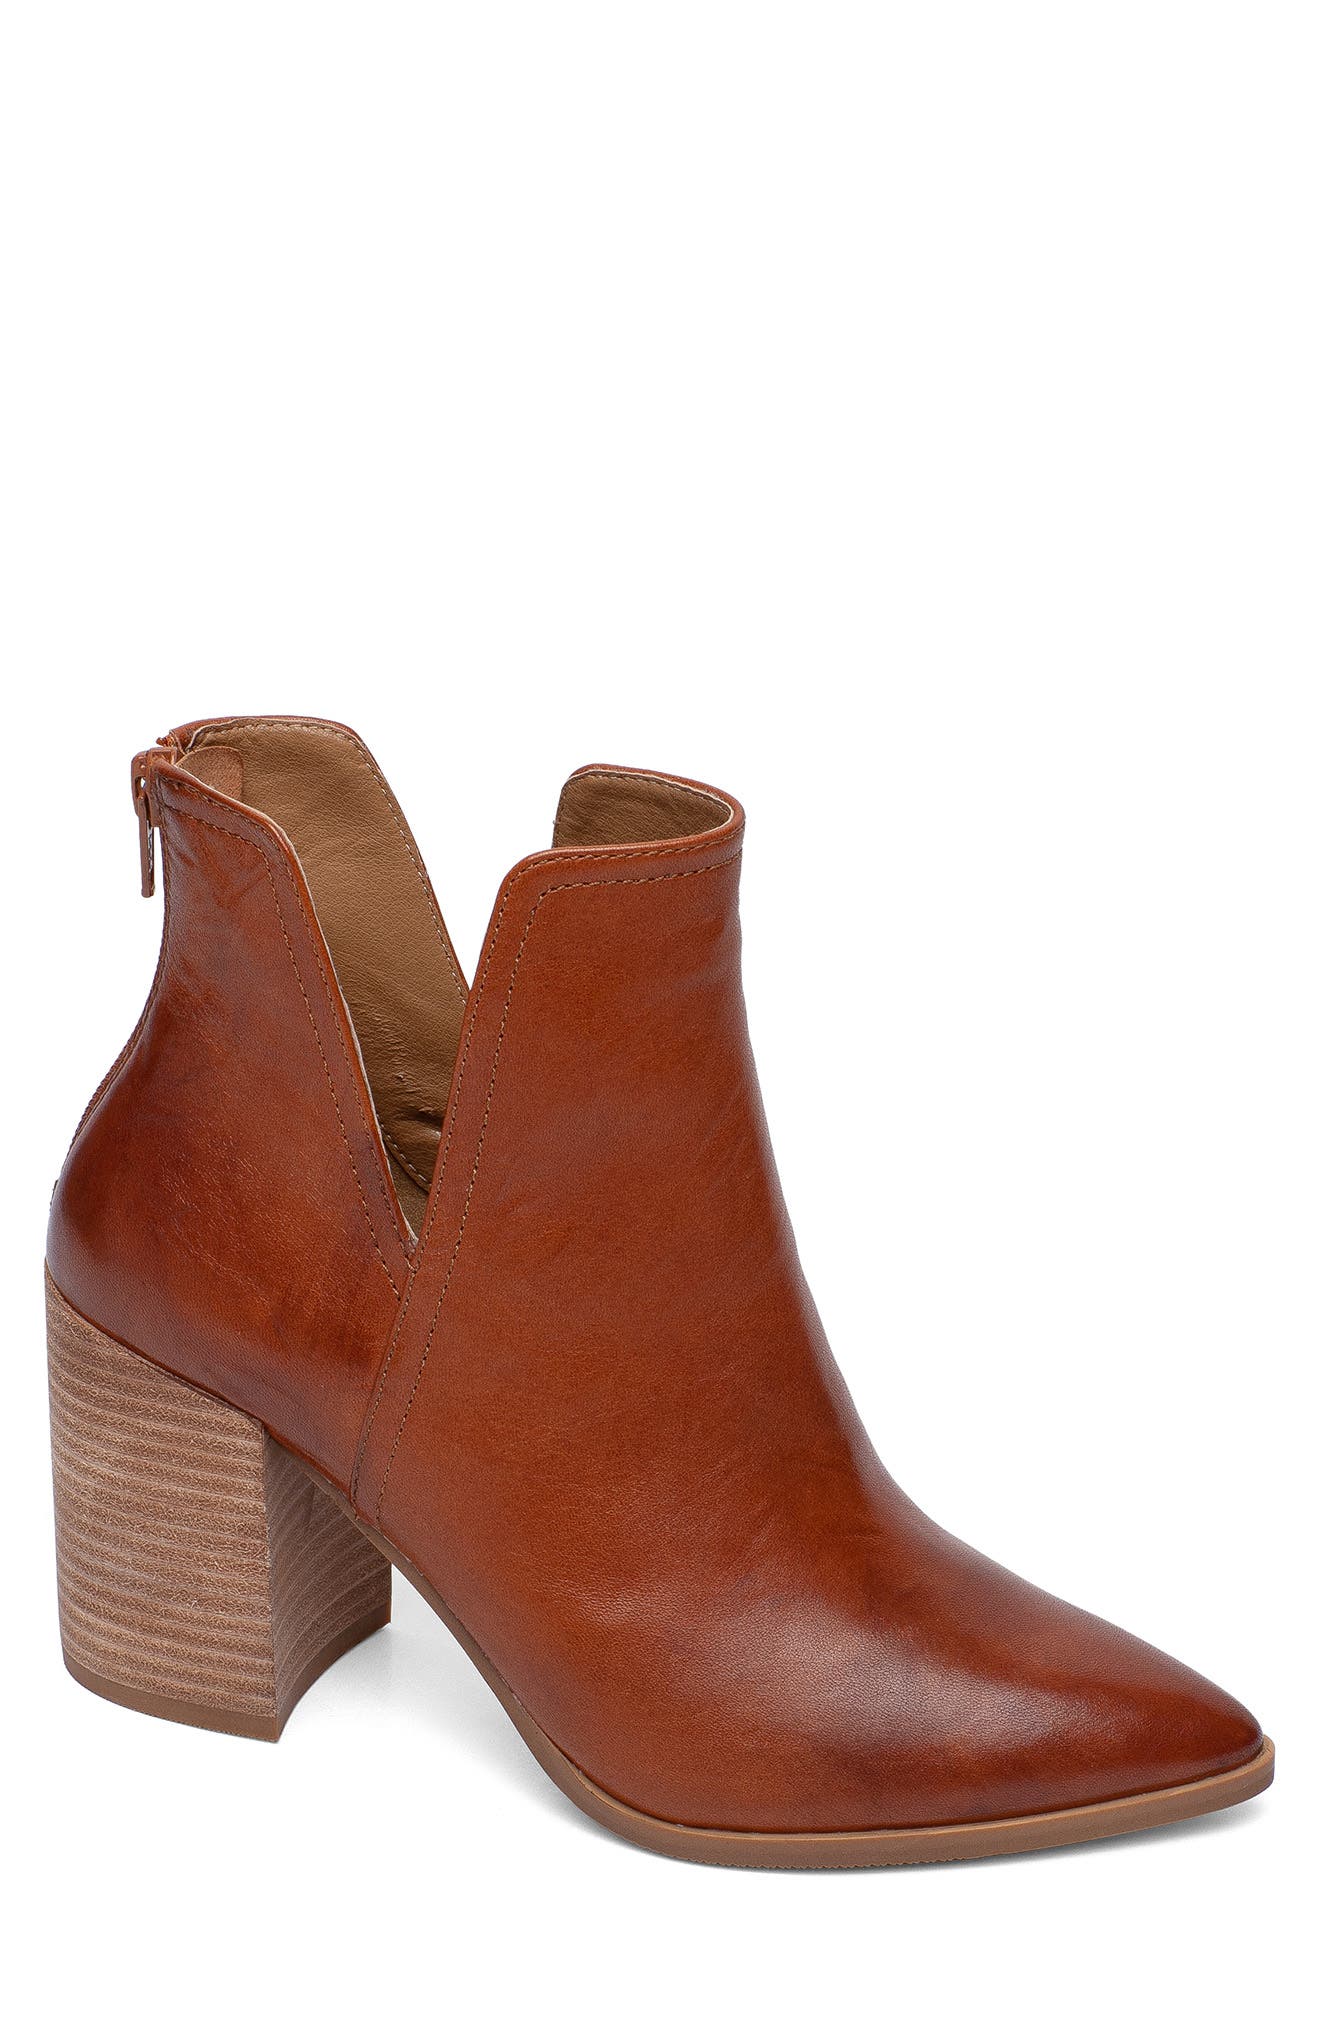 pointed tip ankle boots